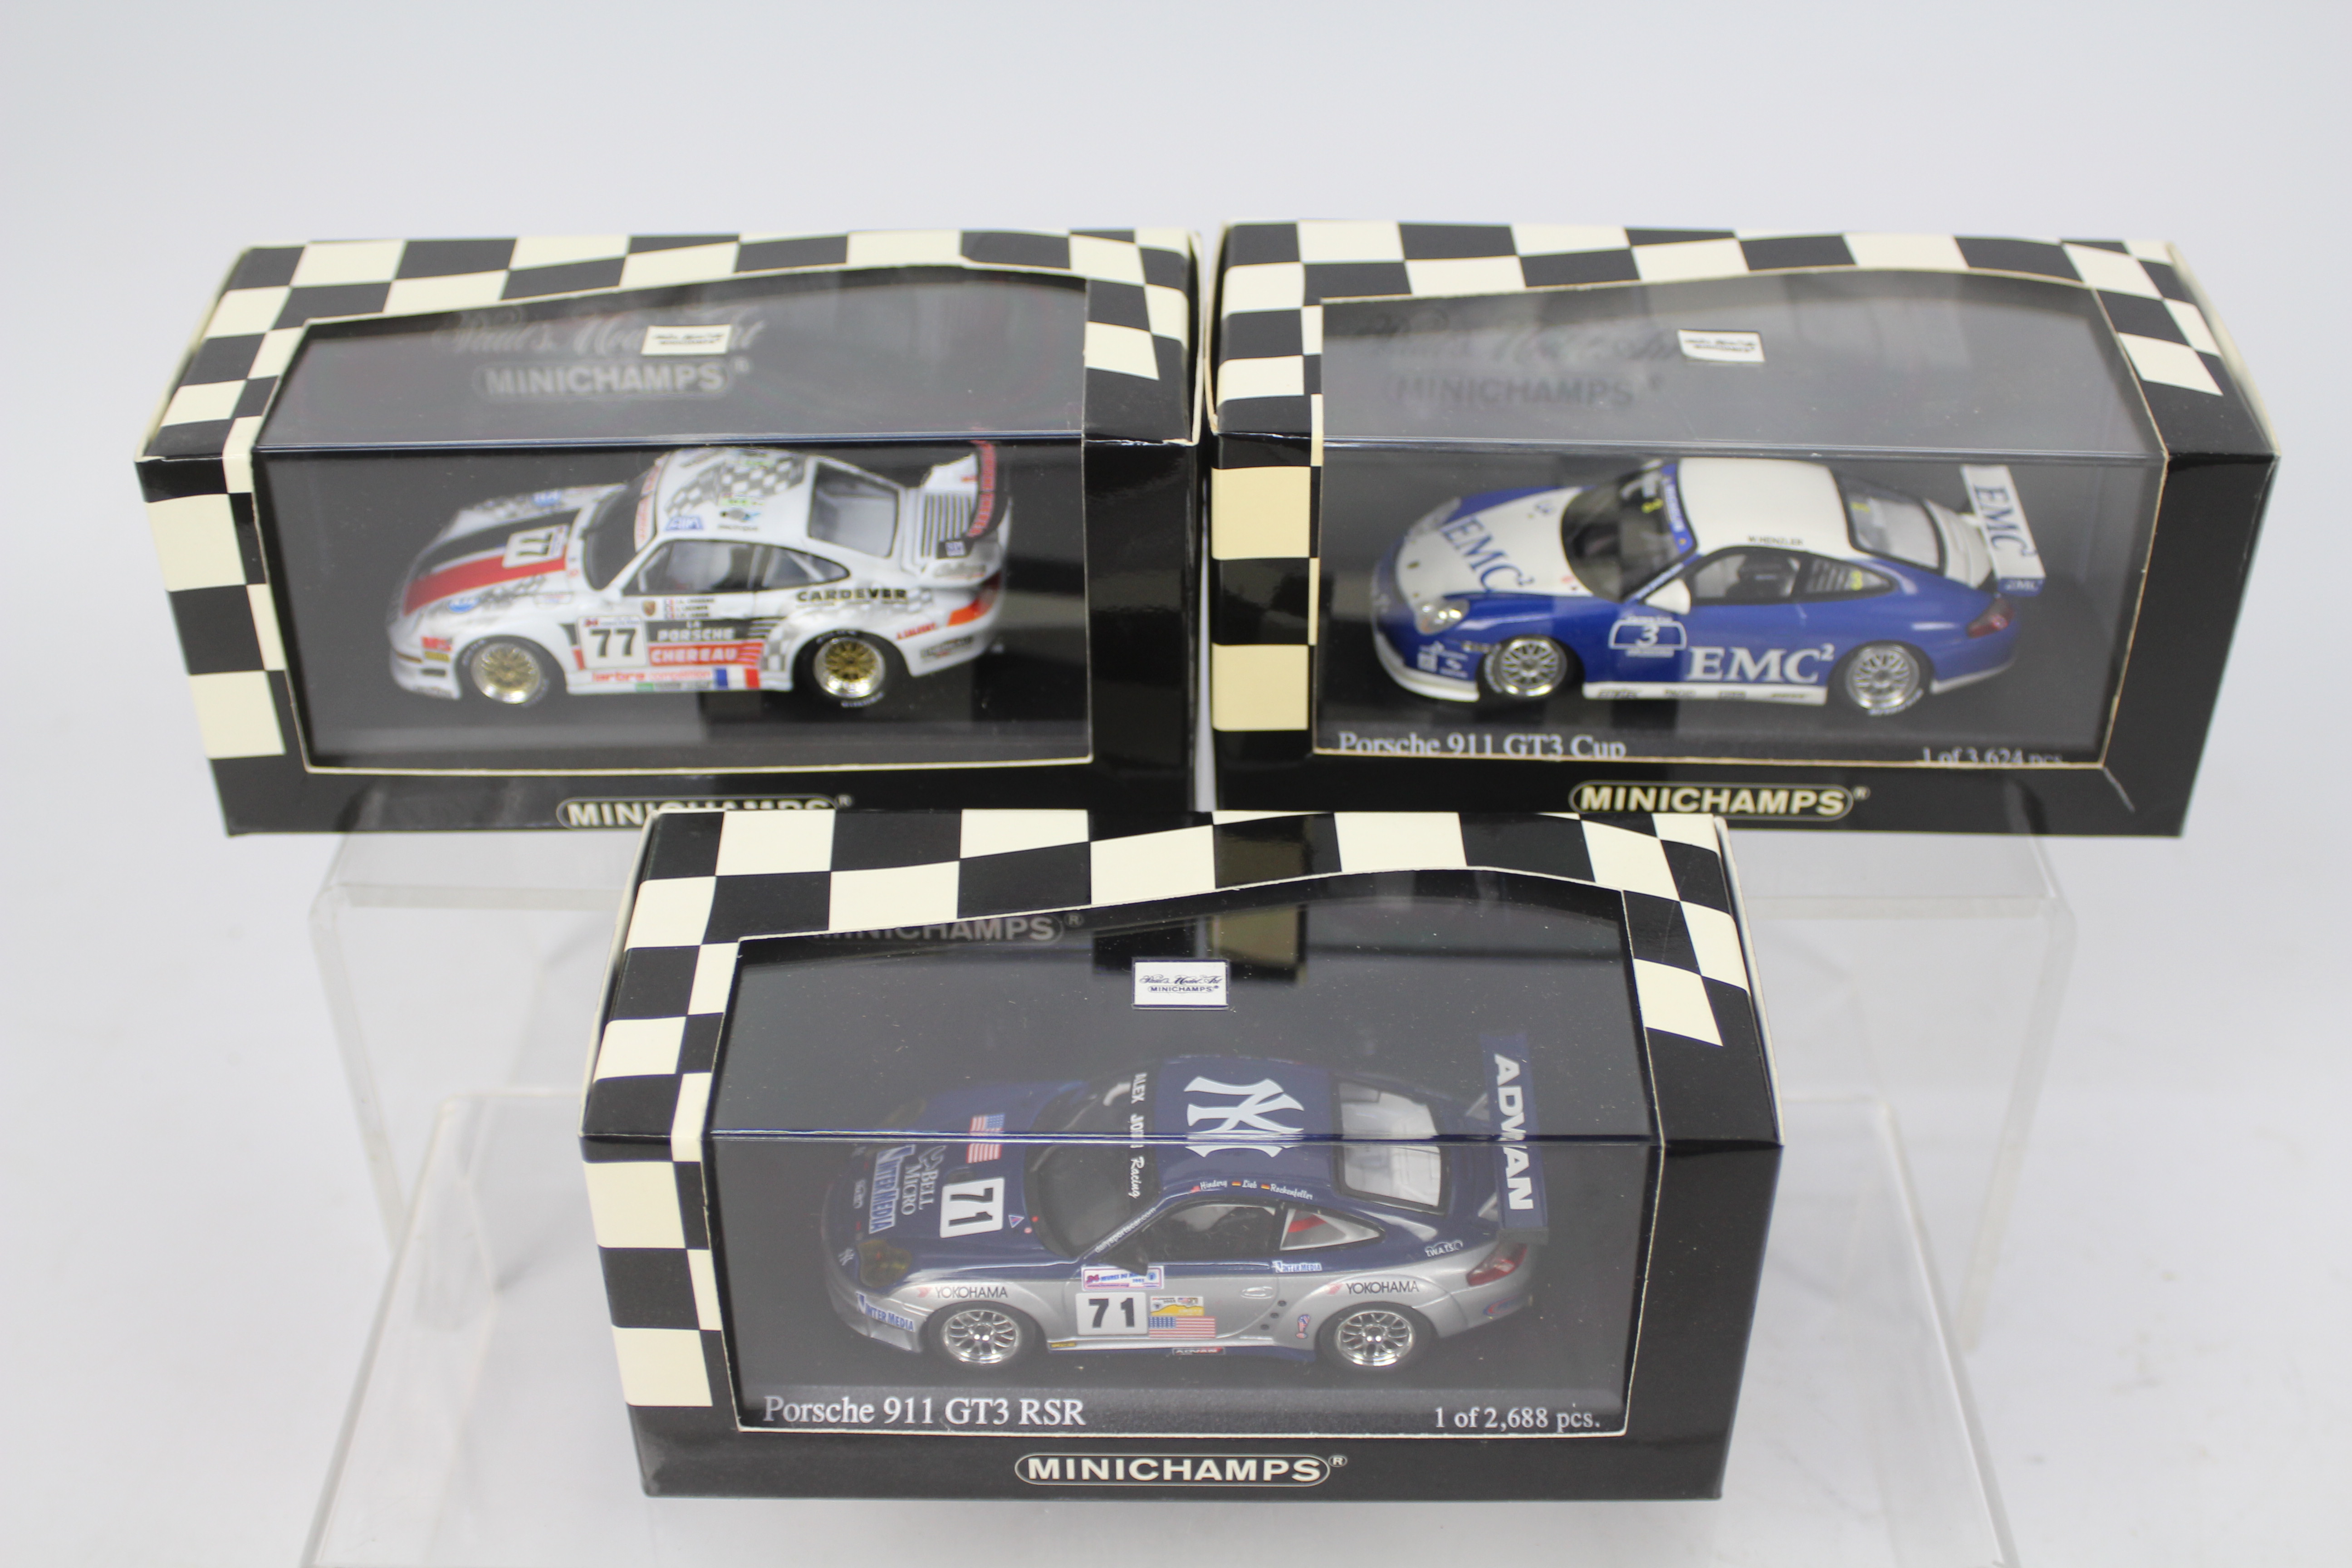 Minichamps - 3 x limited edition Porsche 911 models in 1:43 scale, a GT2 Evo,